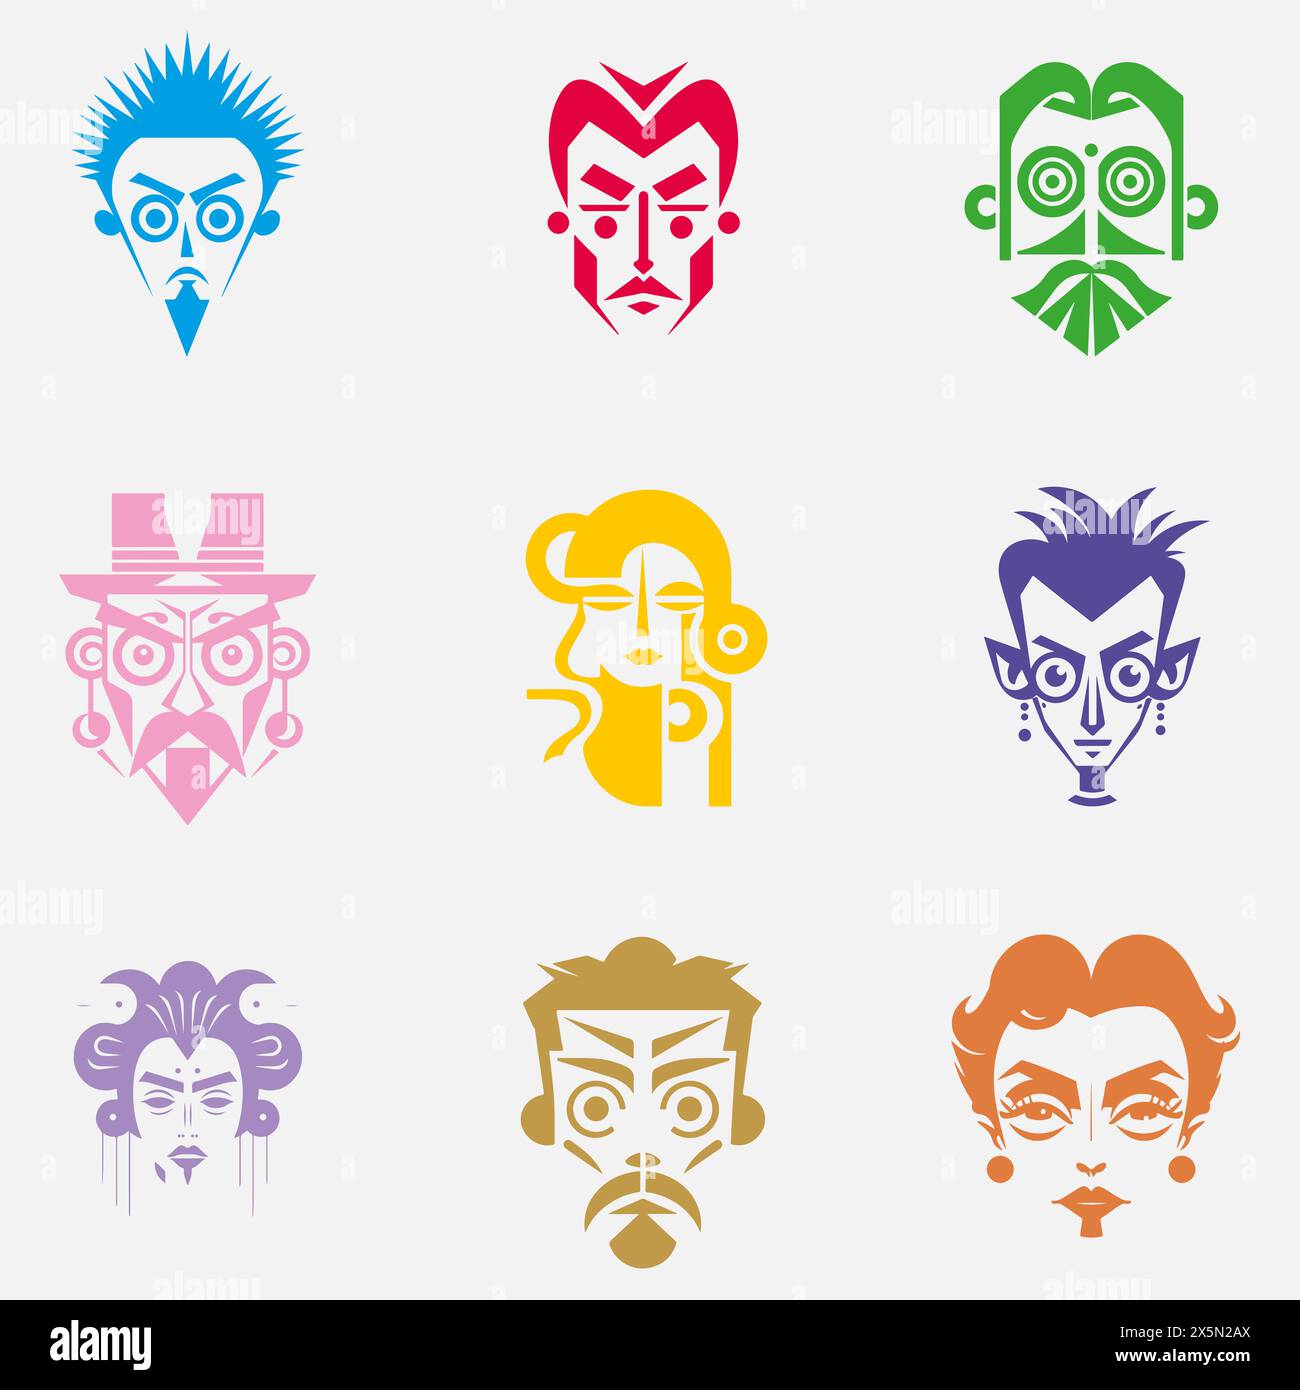 A set of faces, avatars with different colors and styles. The faces are all unique, with some having more detail than others. Game, NFT avatars. Stock Vector